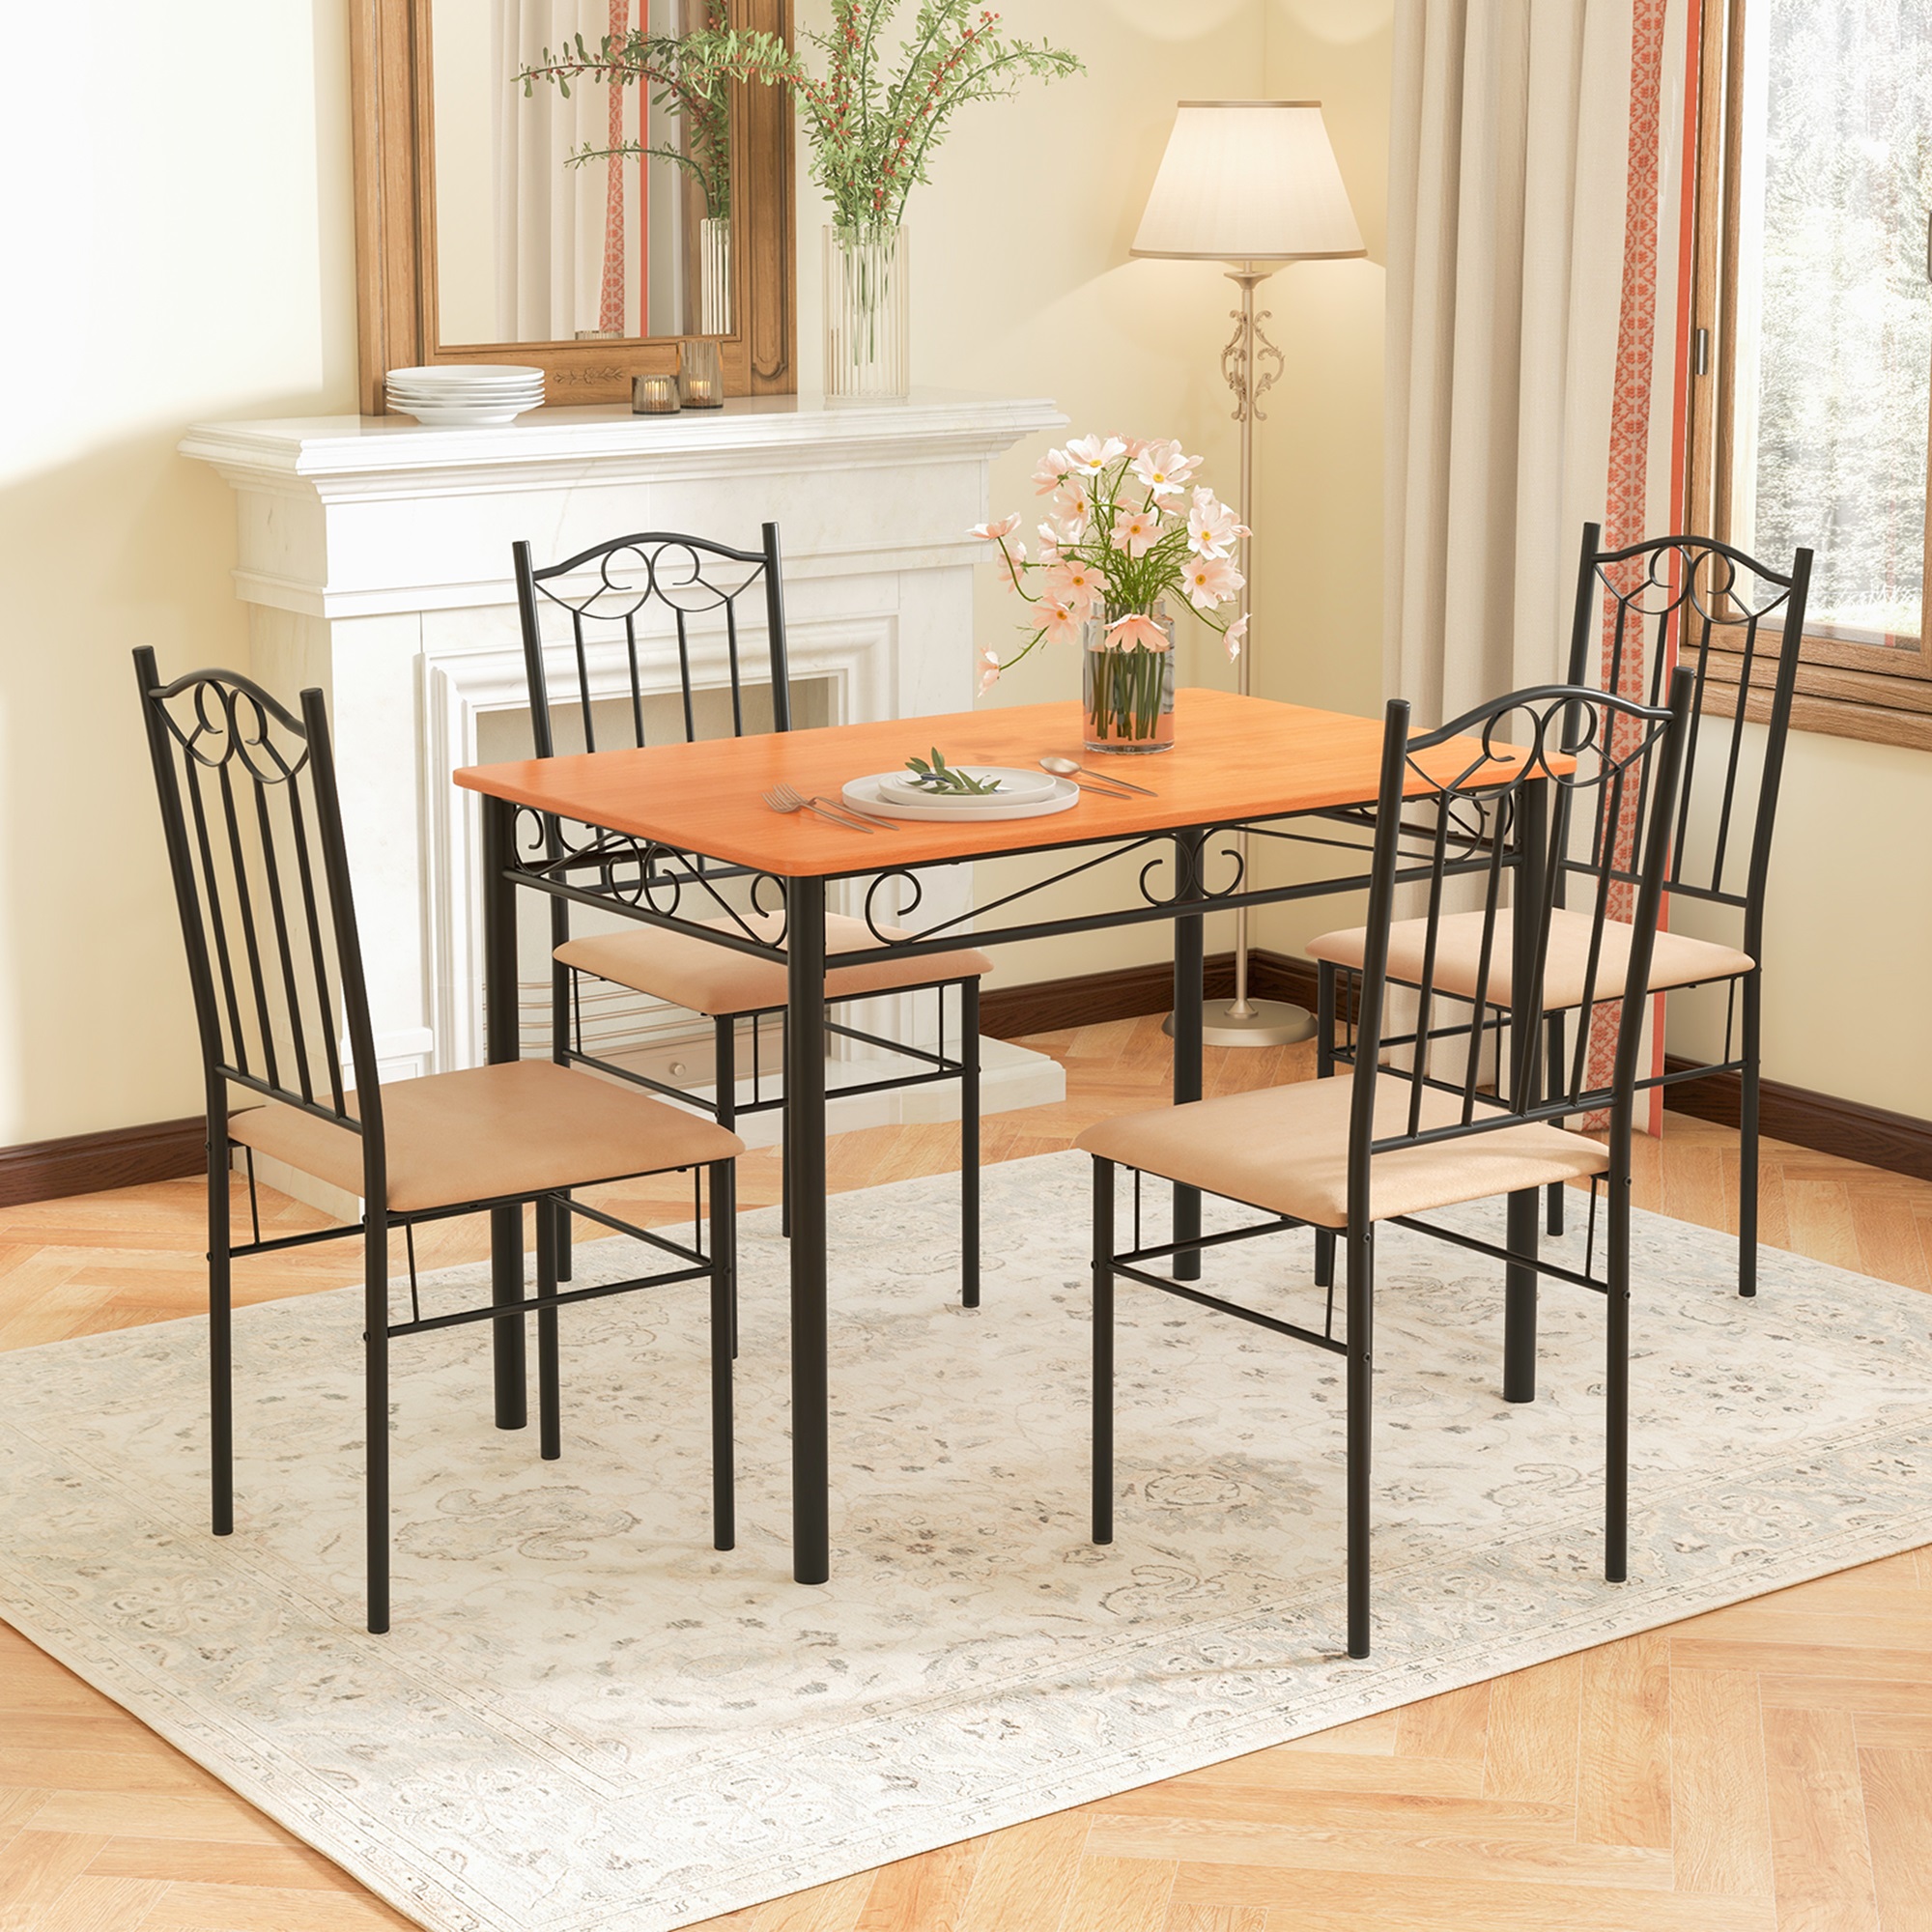 Costway 5 PC Dining Set Wood Metal 30" Table and 4 Chairs Black Kitchen Breakfast Furniture - image 1 of 8